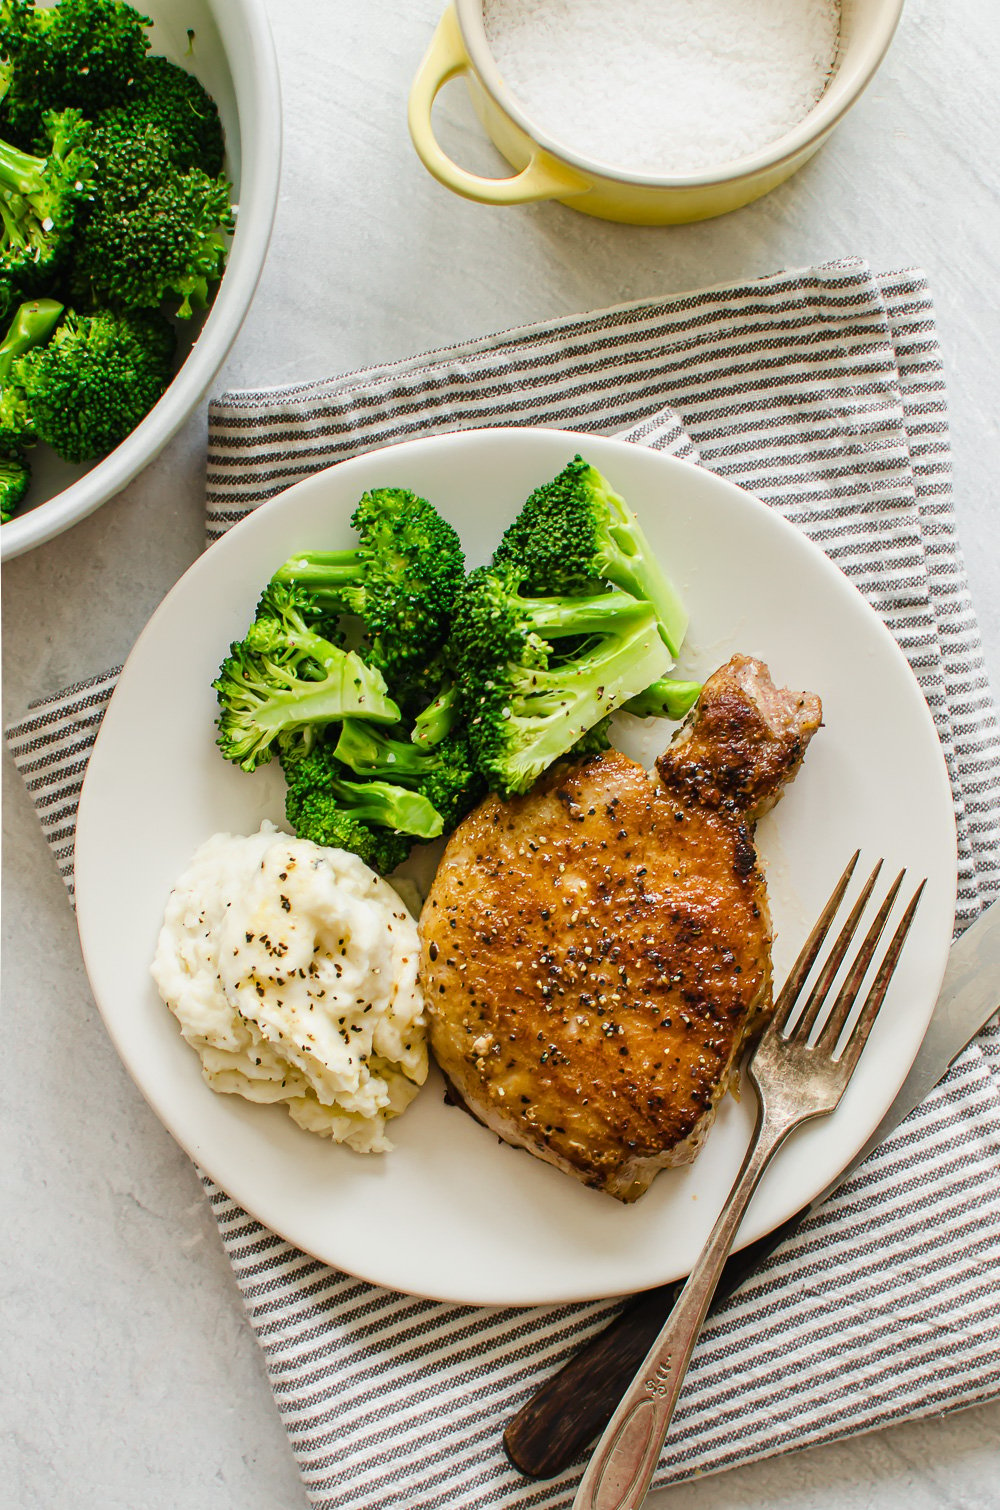 Pan seared pork chop on a white plate with mashed potatoes and broccoli.